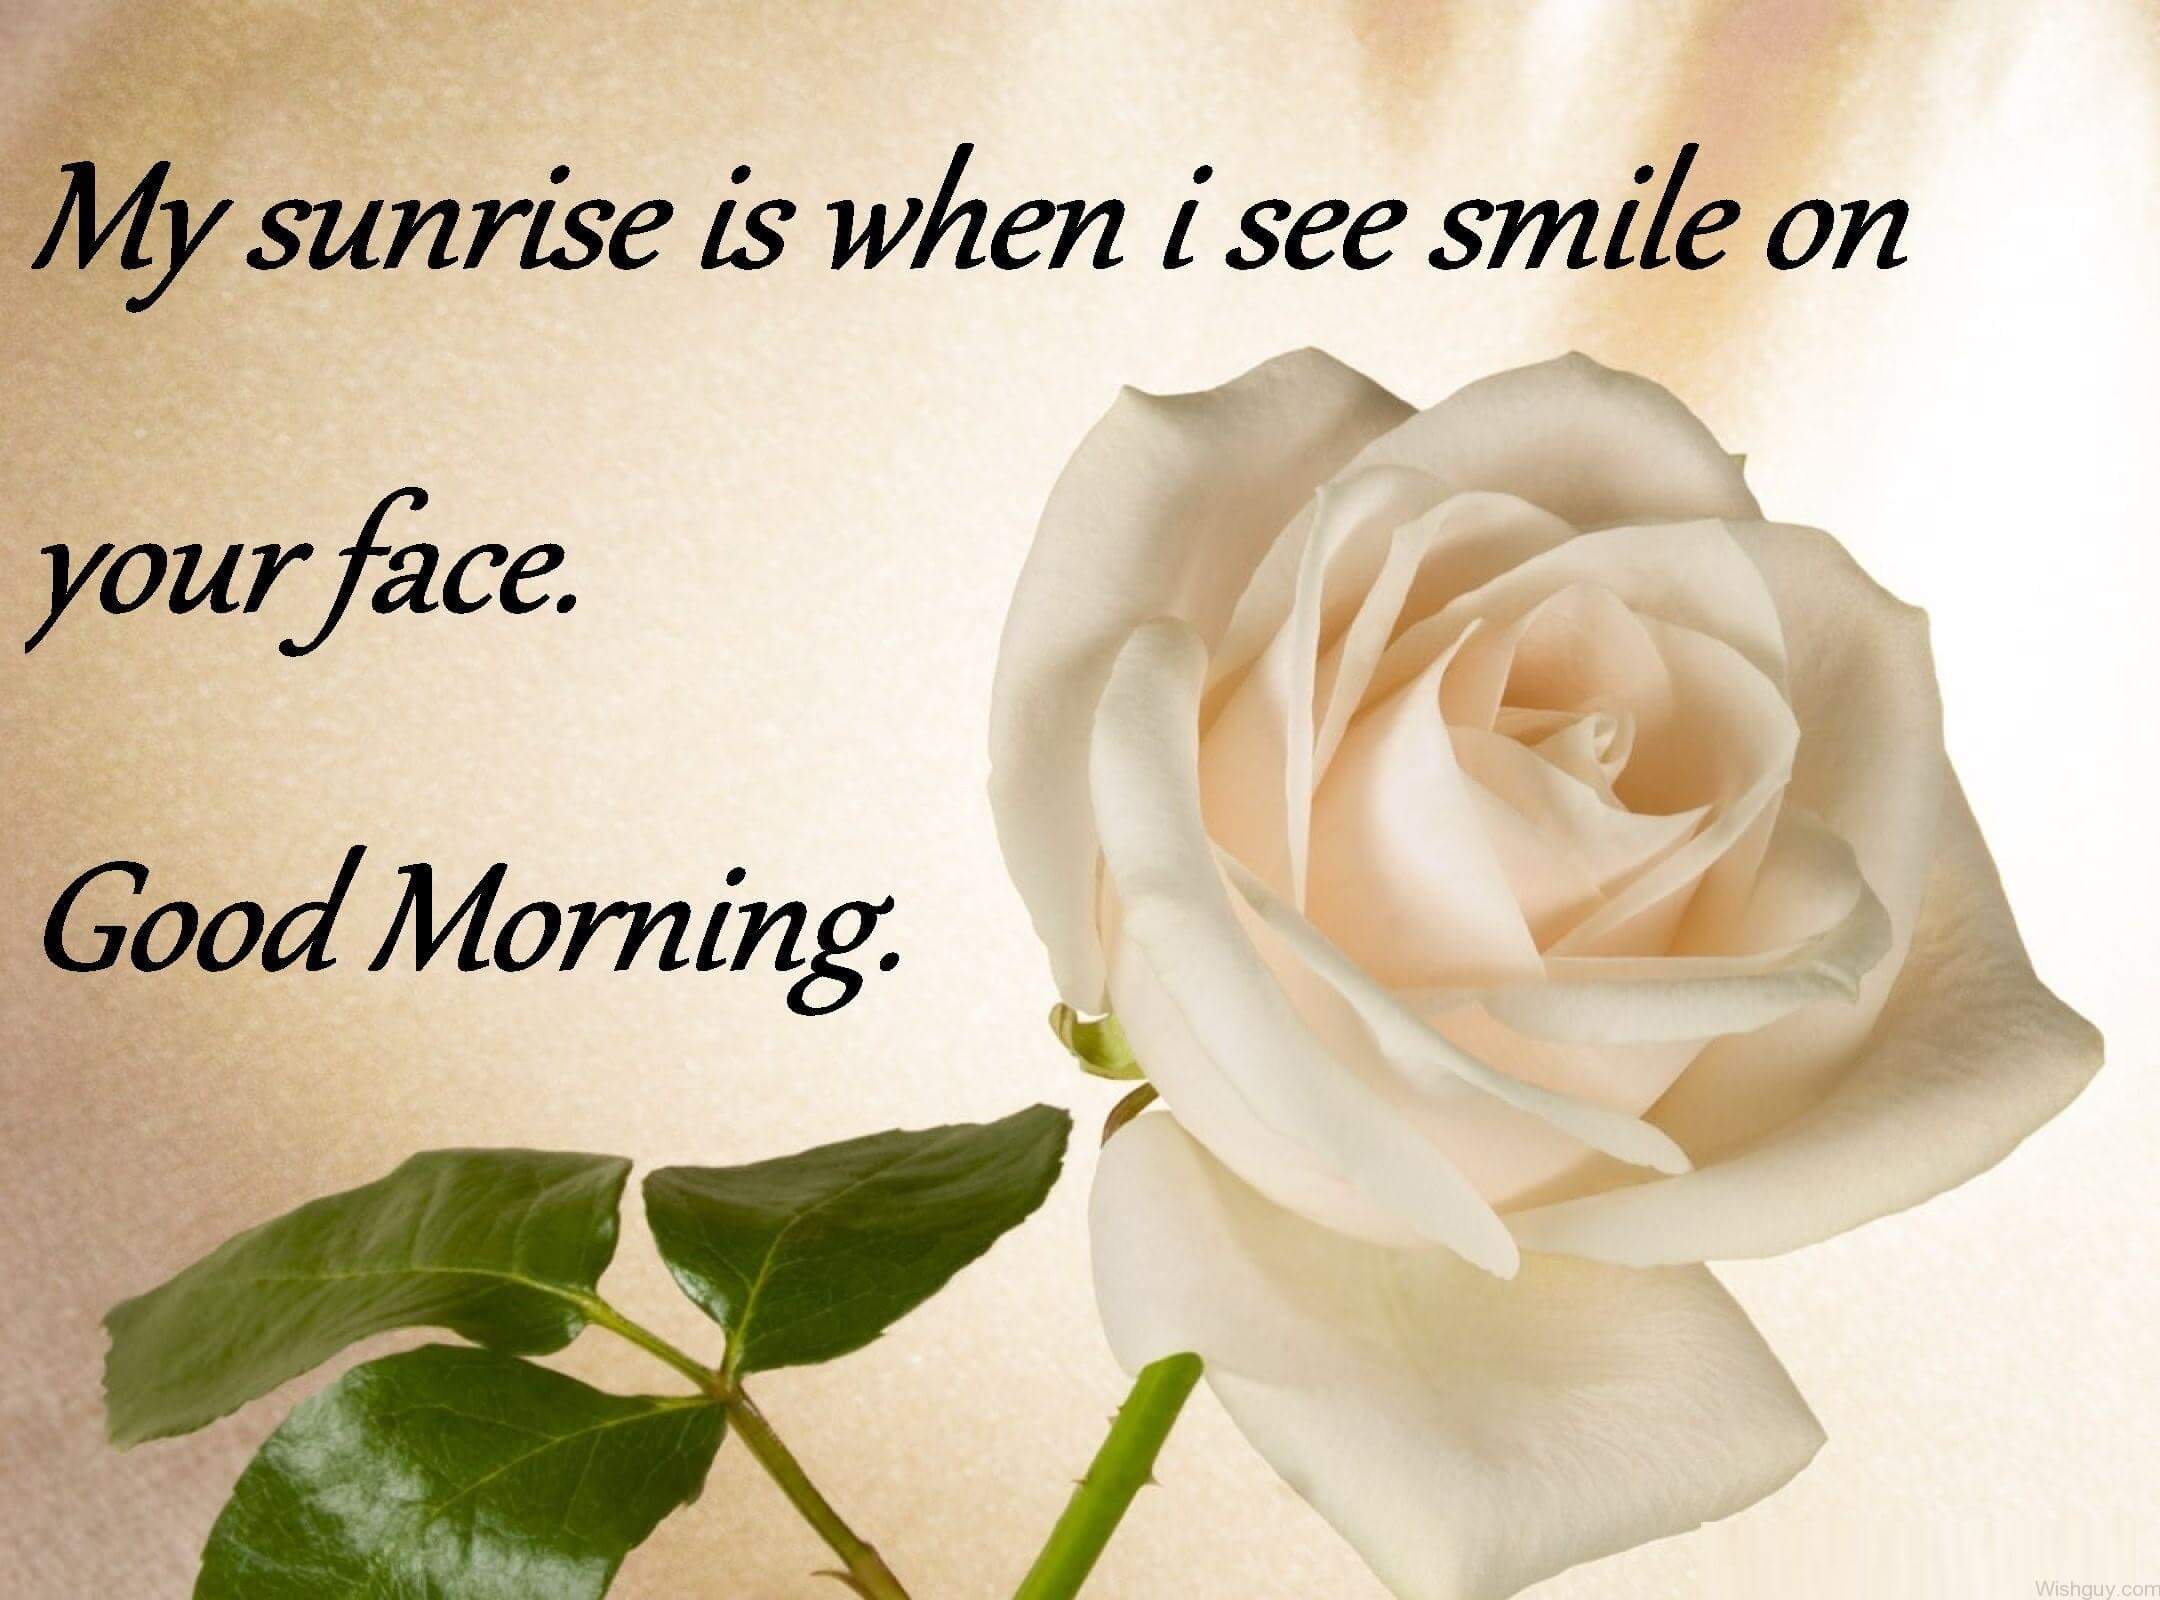 Good Morning True Love Quotes - Good Morning Smile Wishes - HD Wallpaper 